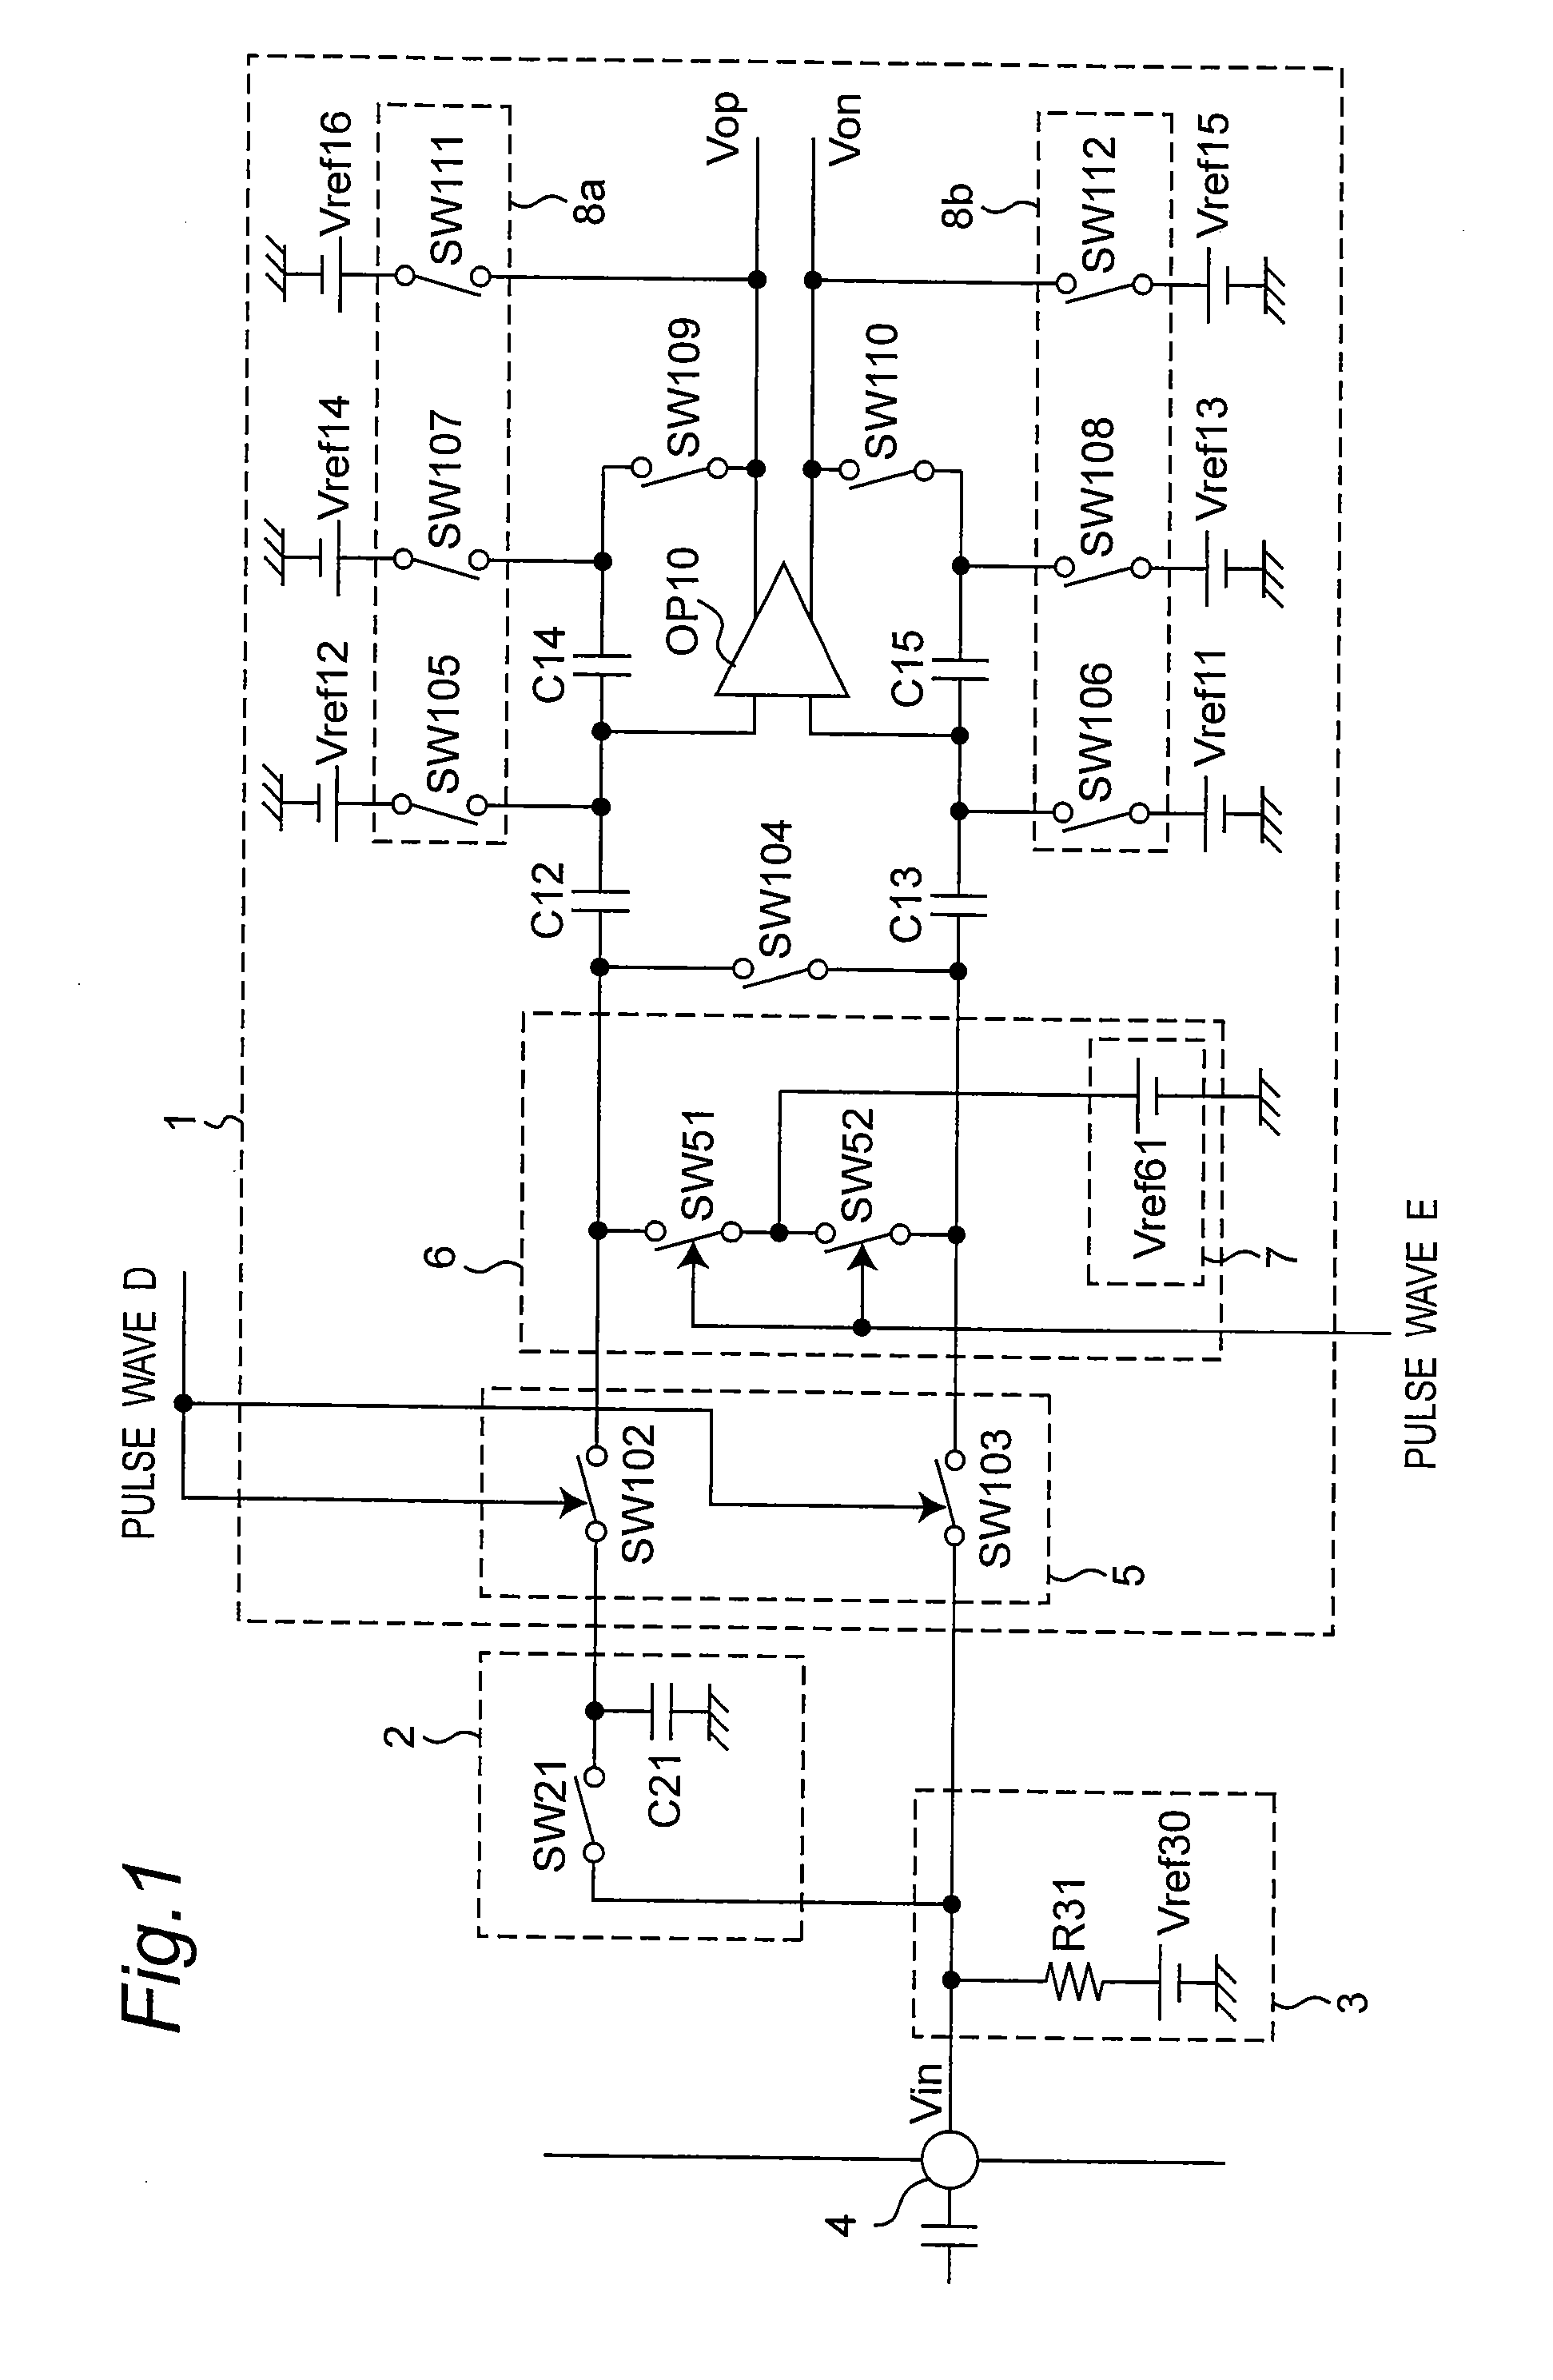 Analog signal processing circuit for ccd camera, and analog signal processing method